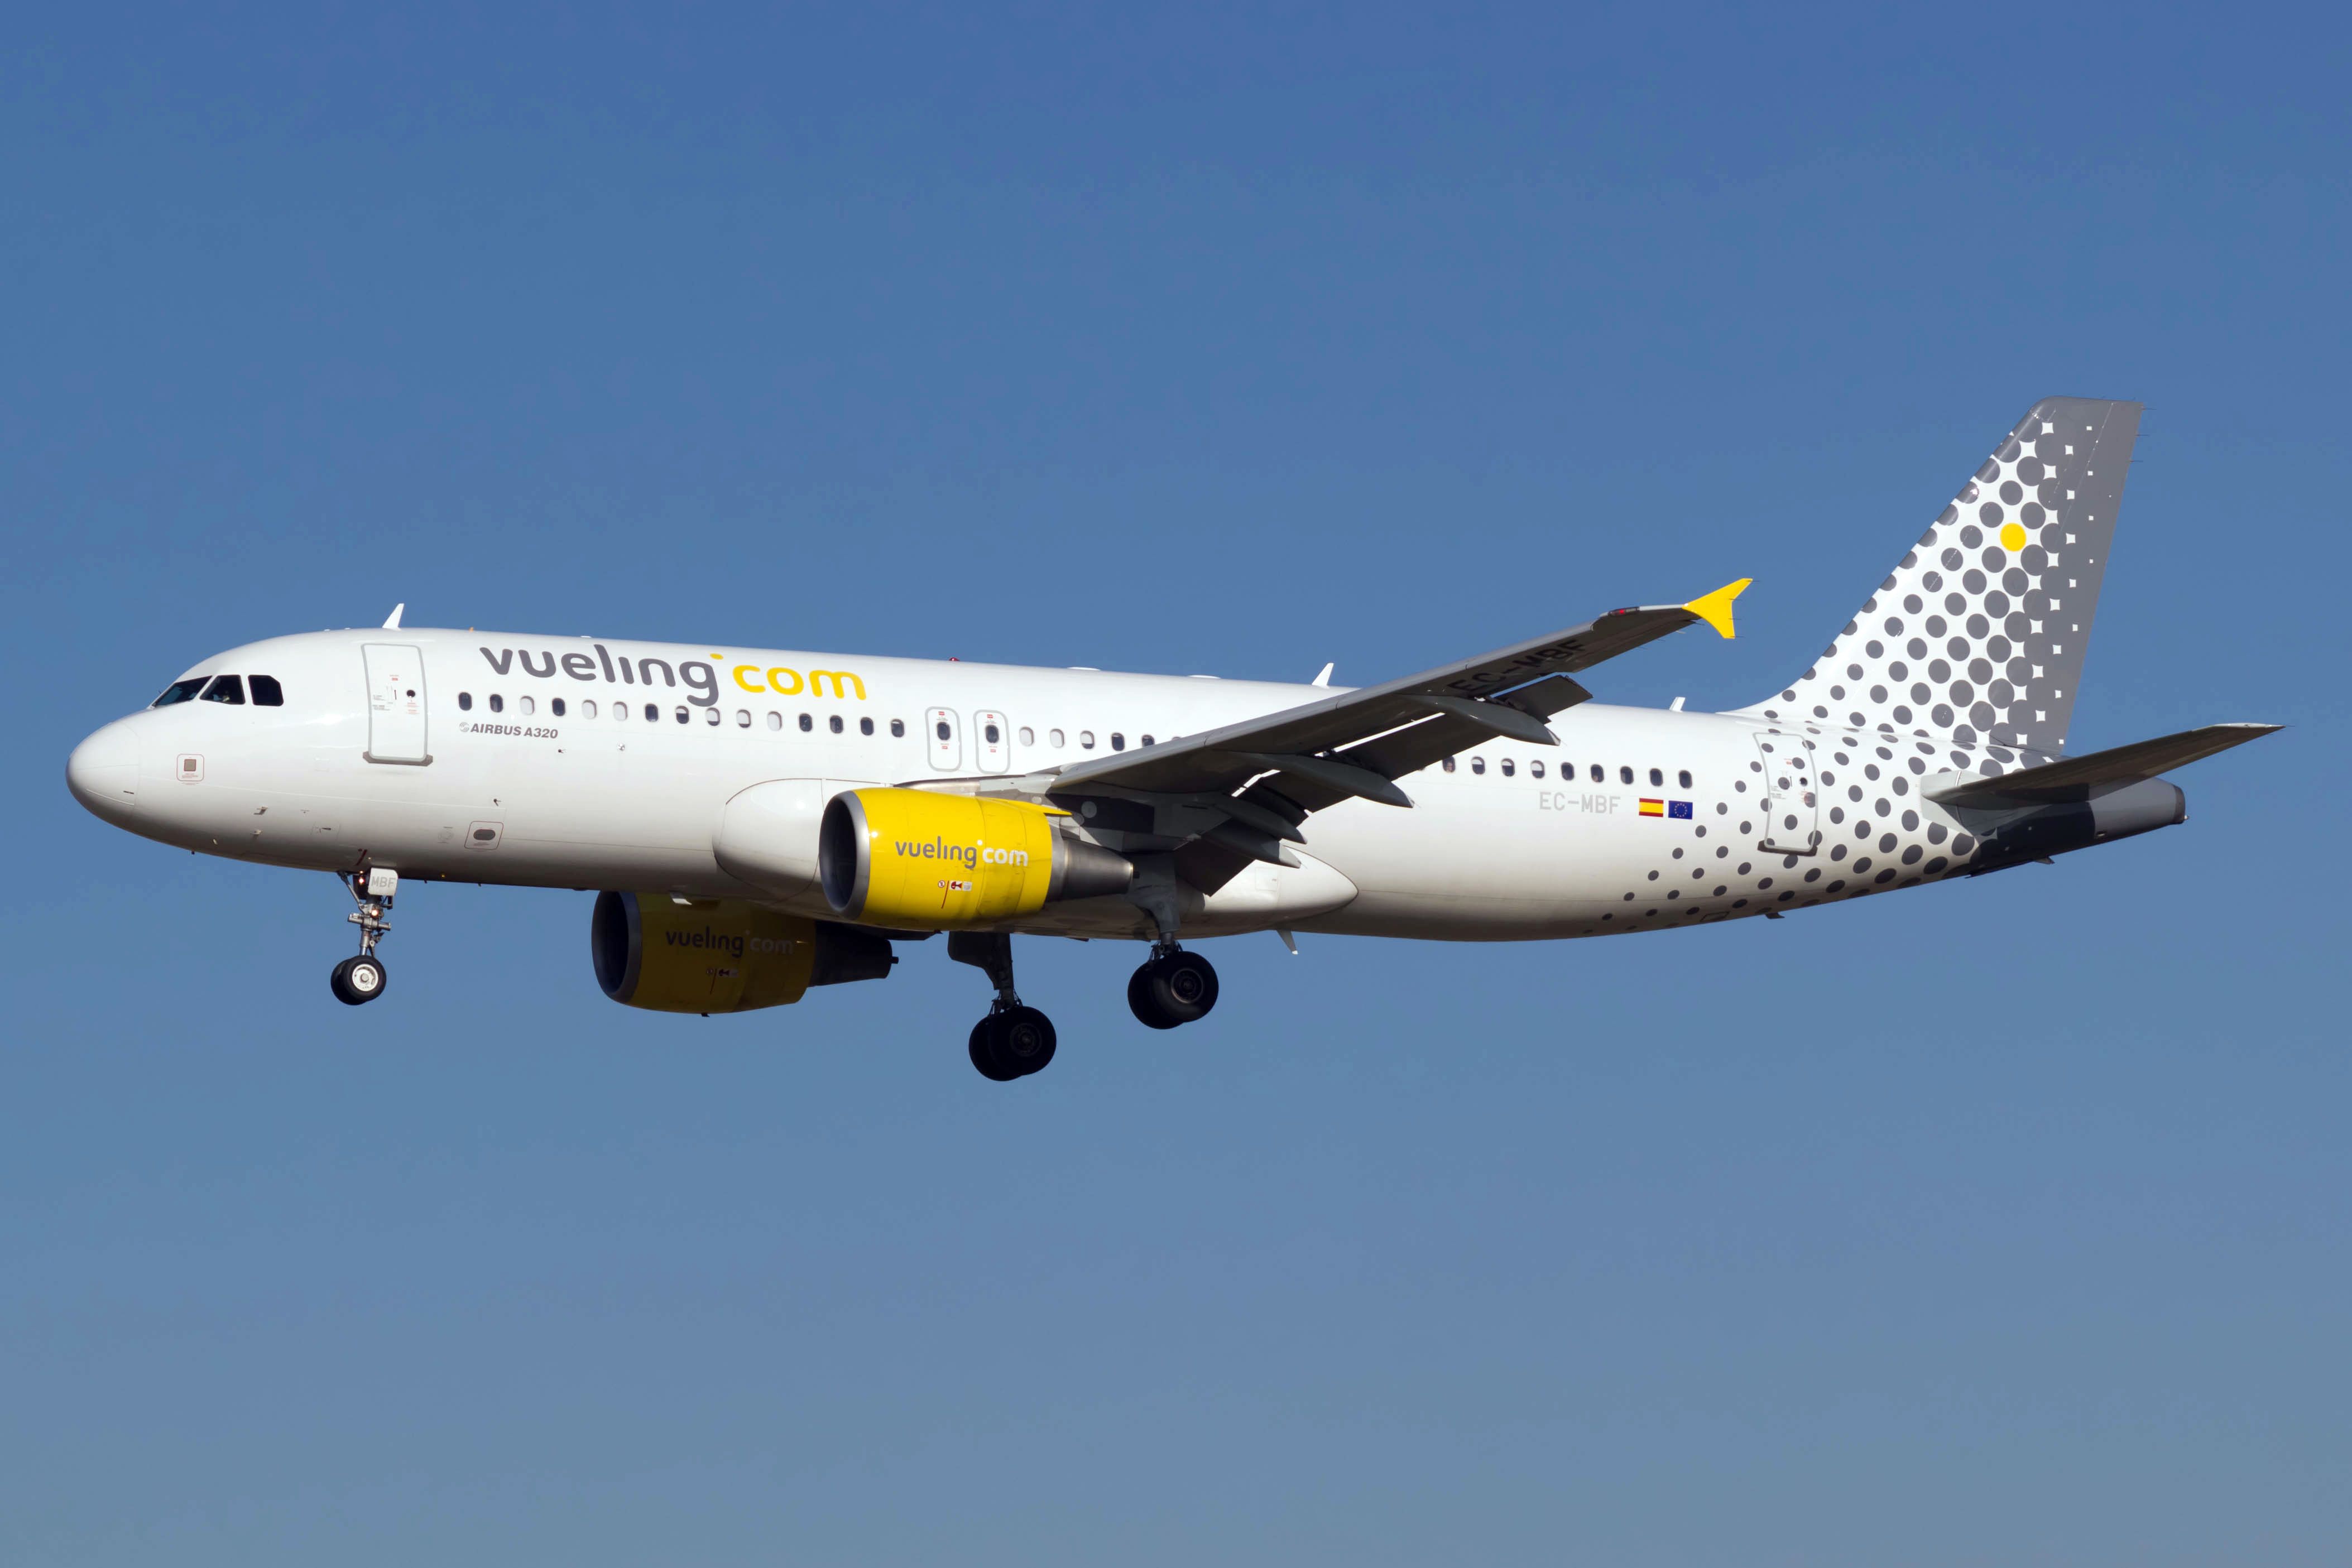 A Vueling Airbus A320 flying in the sky.